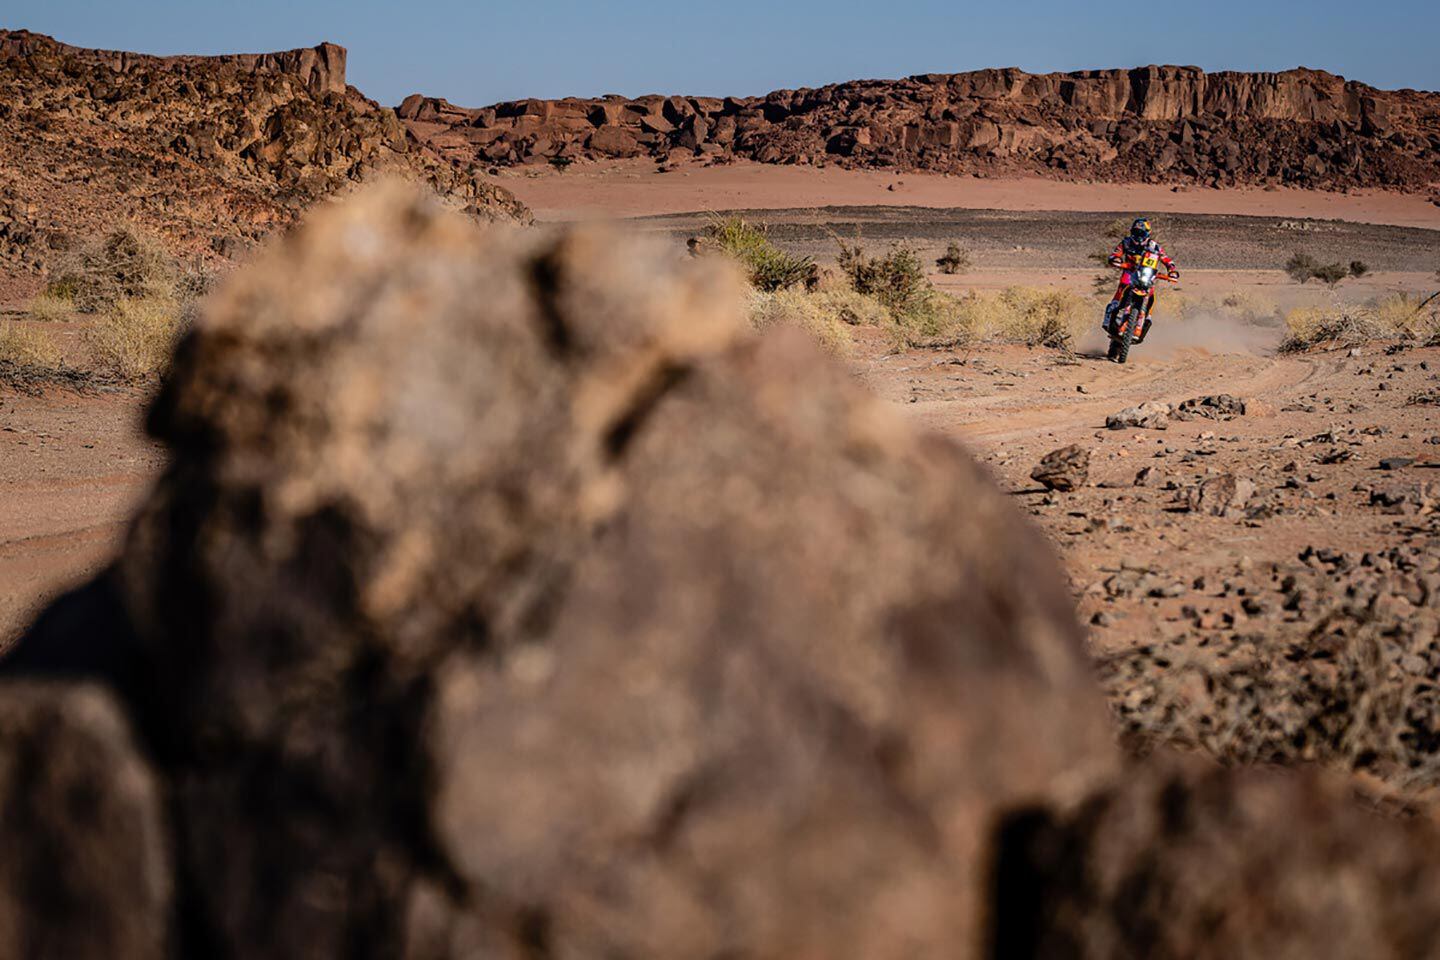 A day of rocks awaits the Dakar riders on the 480-kilometer (298 miles) Stage 11.